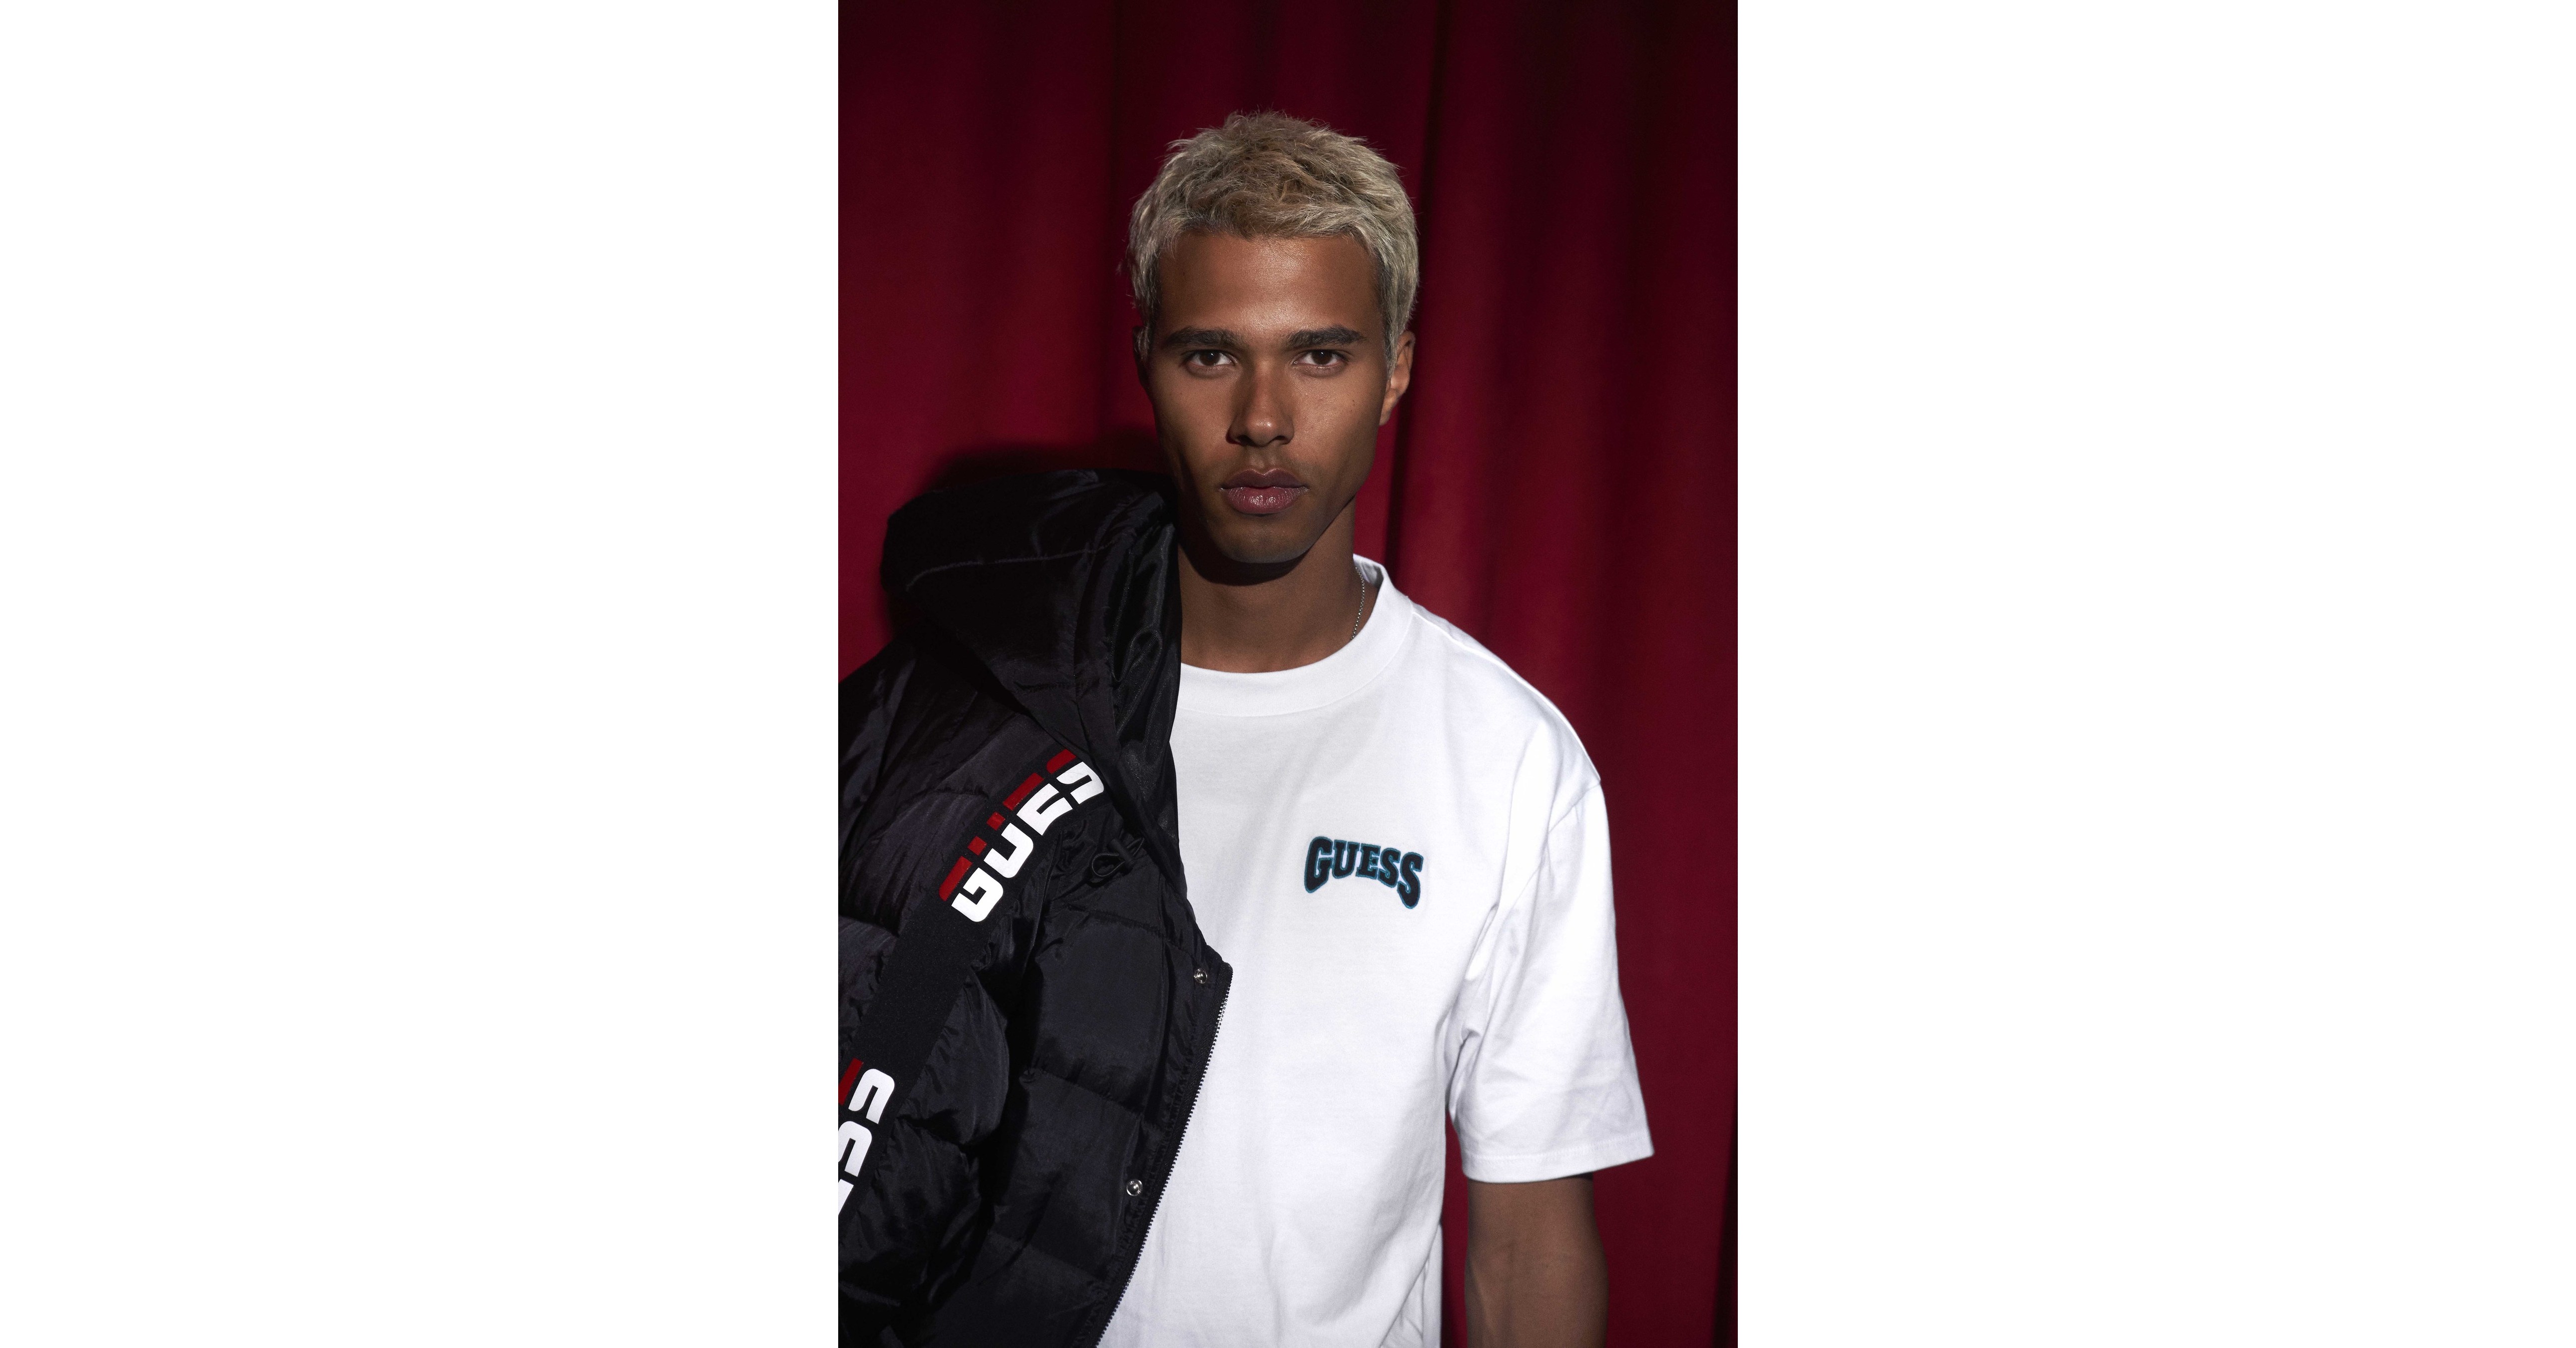 sovjetisk Cyberplads mærke navn Introducing the GUESS Originals Holiday 2019 Capsule Collection